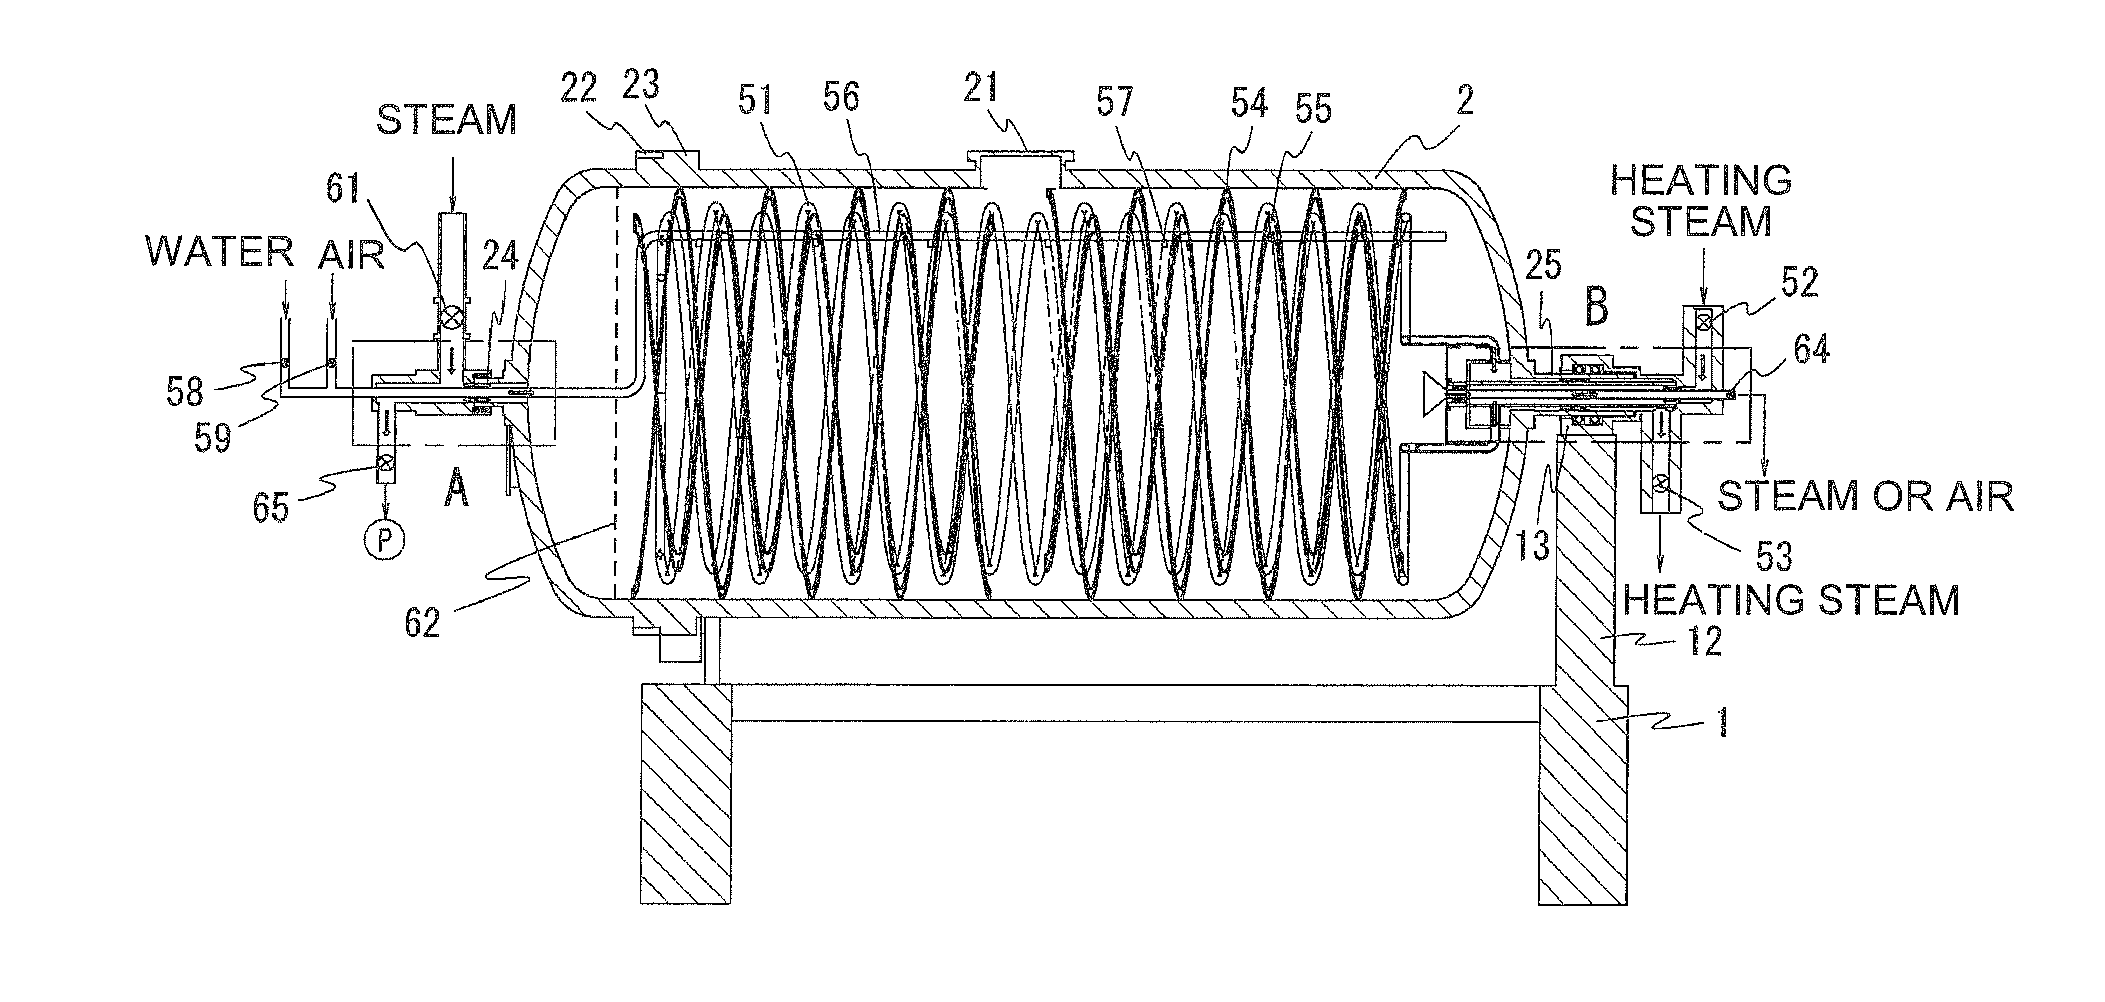 Apparatus for producing parboiled rice